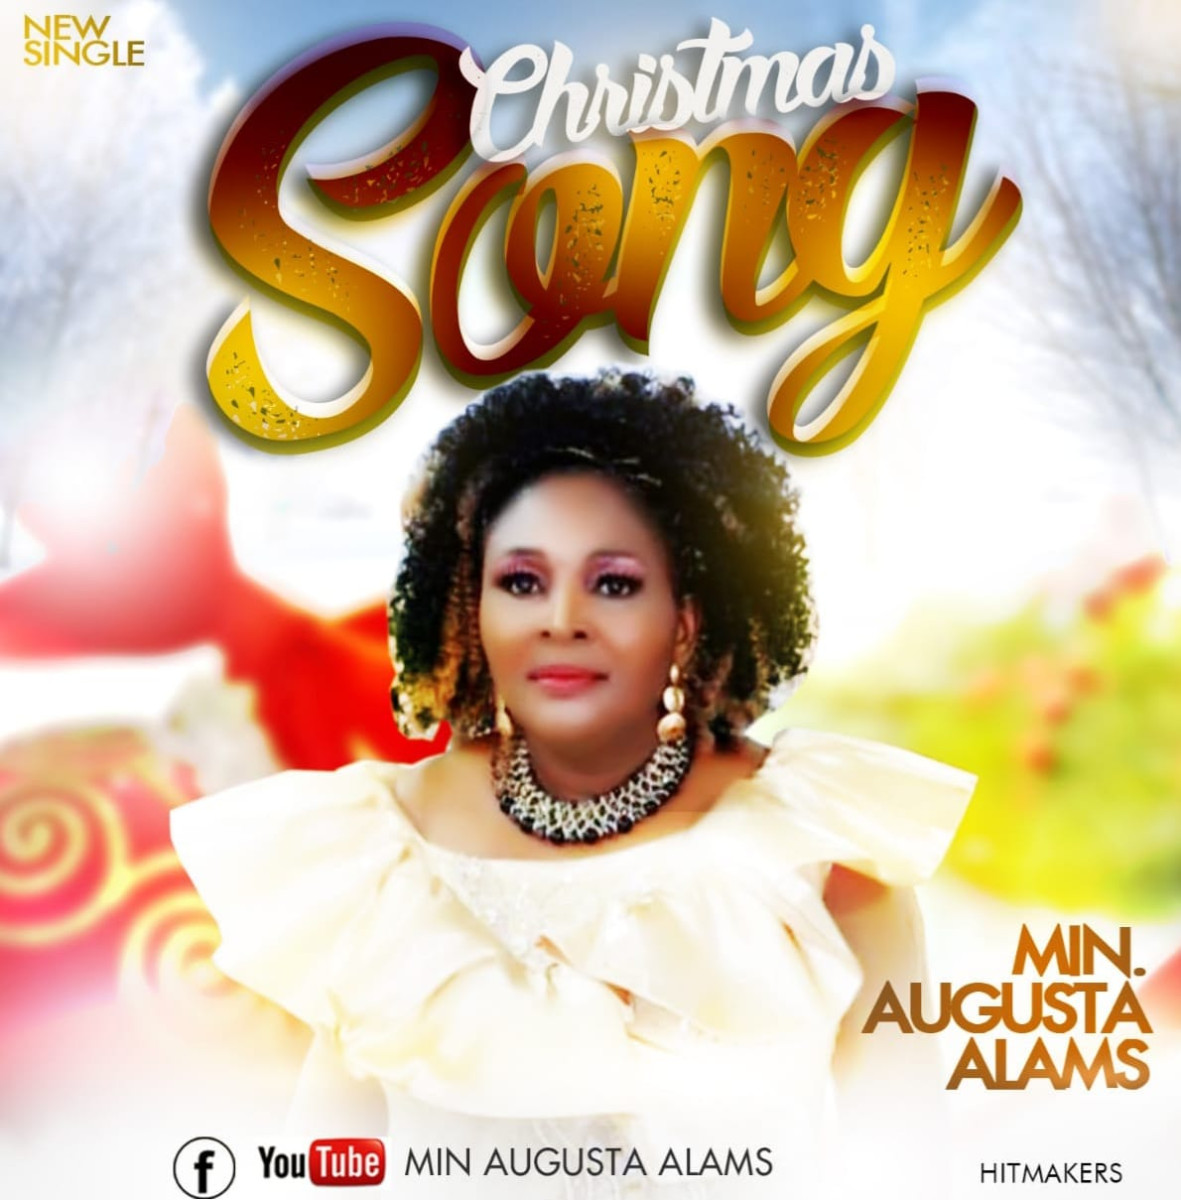 Christmas Song By gusta Alams